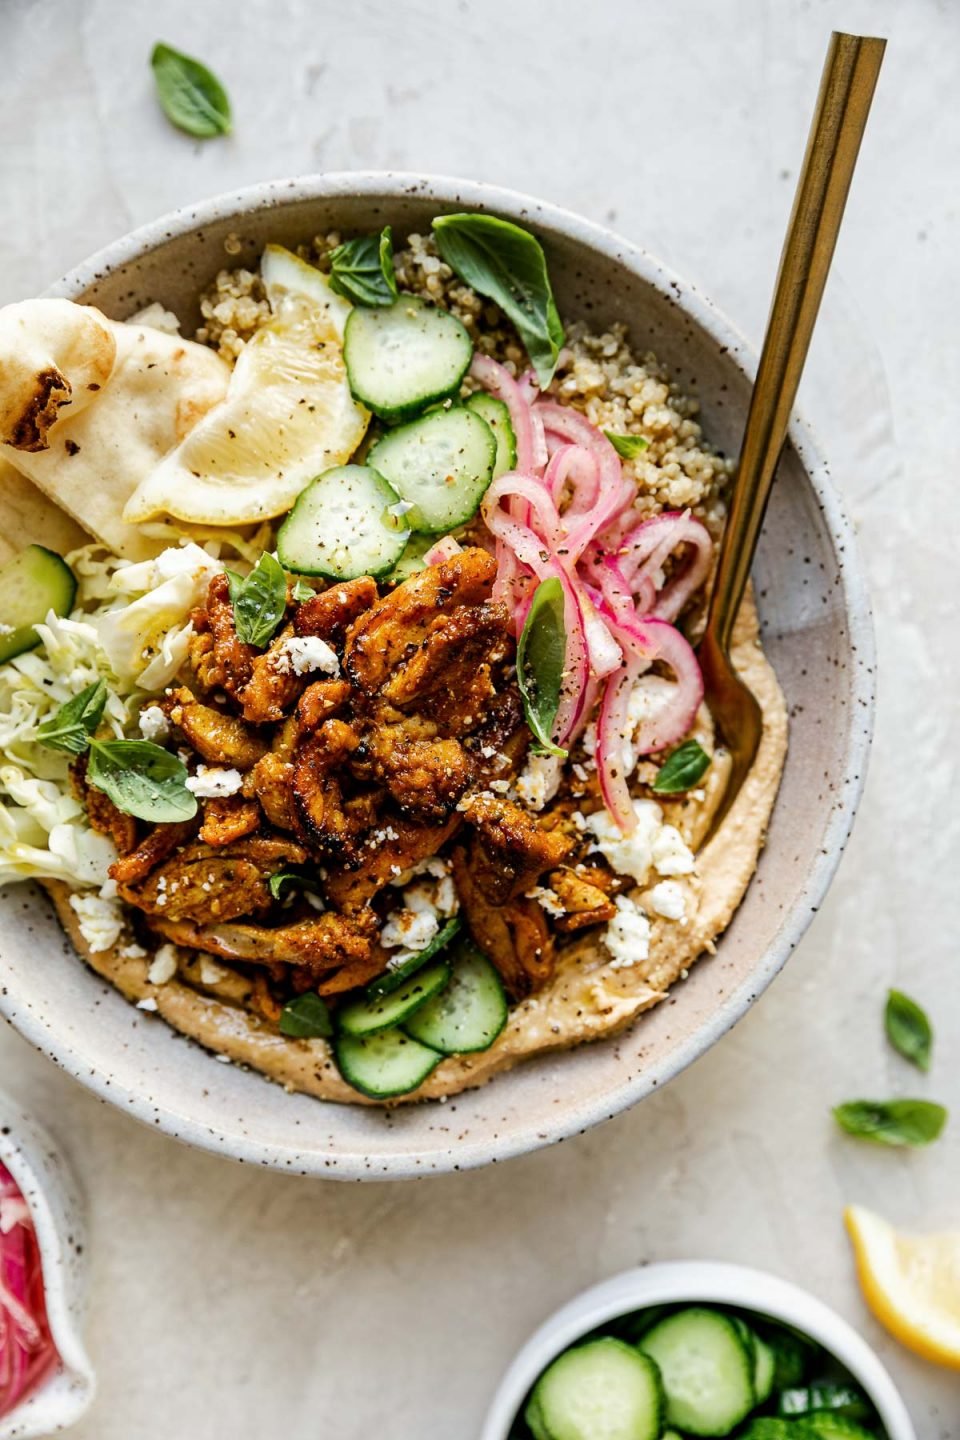 Chicken Shawarma Hummus Bowl with quinoa, cucumbers, pickled red onion, shredded cabbage, & naan bread shown in a speckled gray ceramic bowl. The bowl sits atop a creamy cement surface, surrounded by lemon wedges, fresh basil leaves, a small bowl of pickled red onions, & a small bowl of sliced cucumbers.